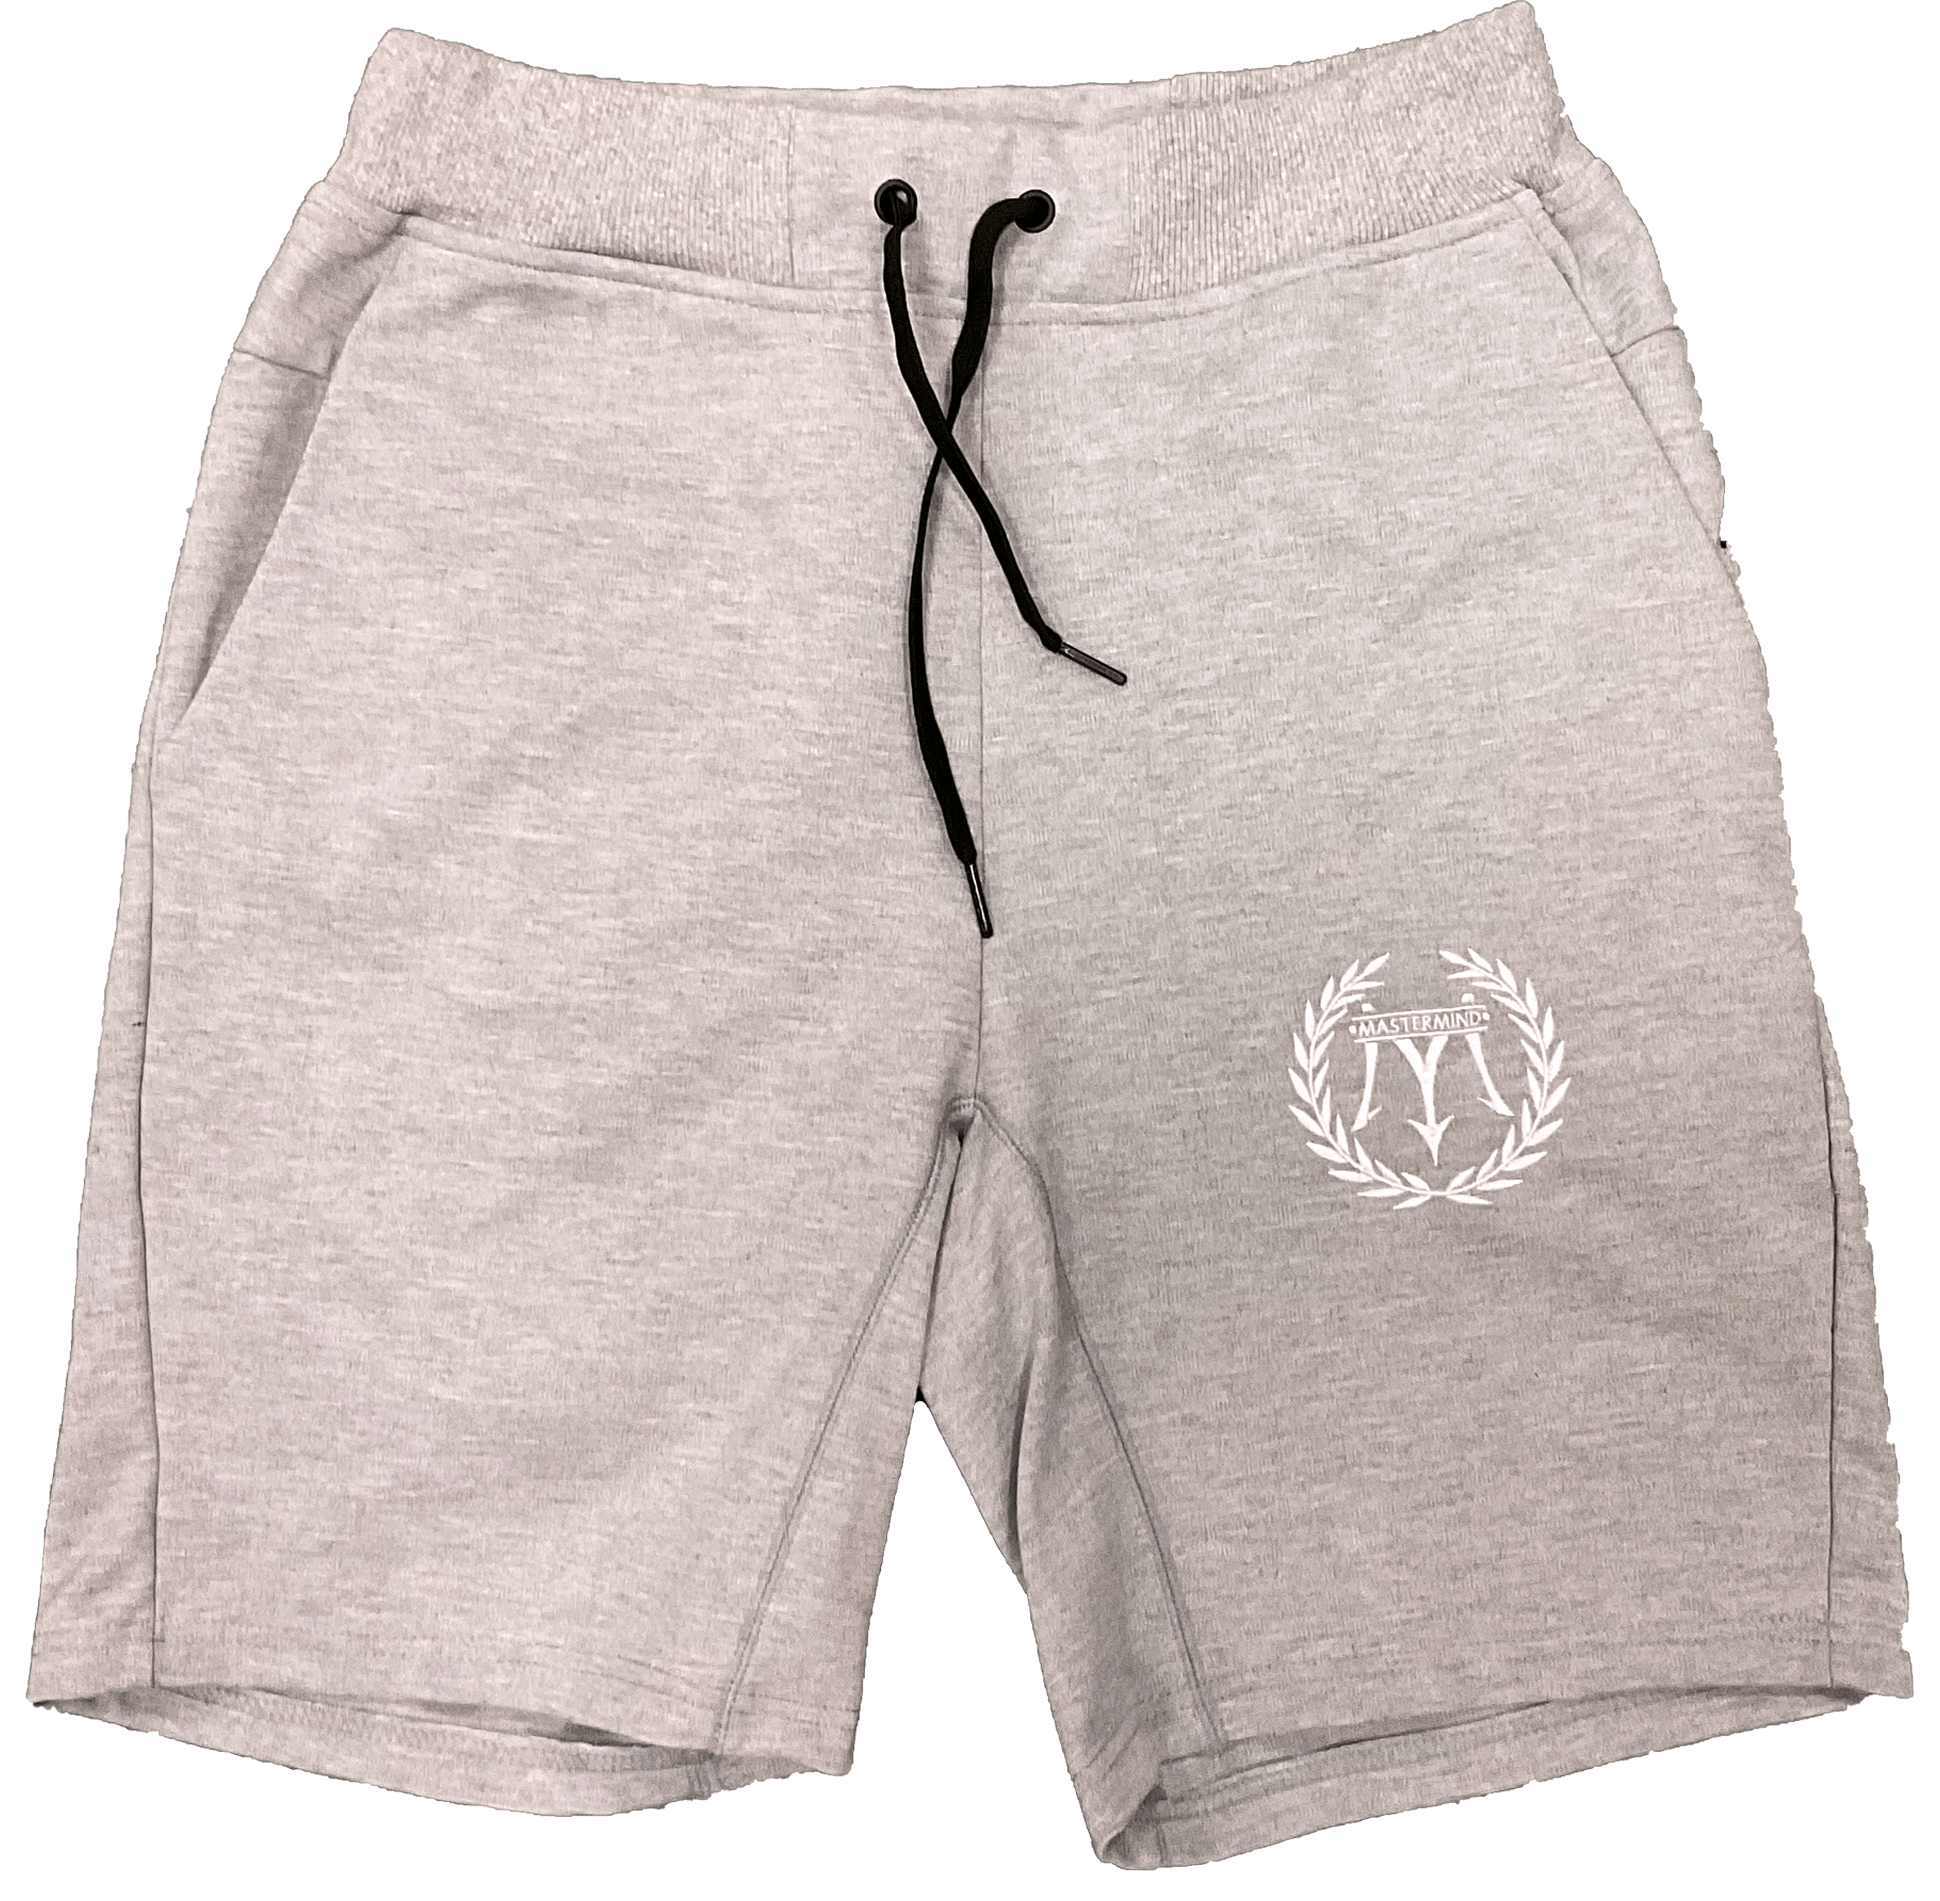 Mastermind315 S Cool Gray Mastermind Tech Shorts